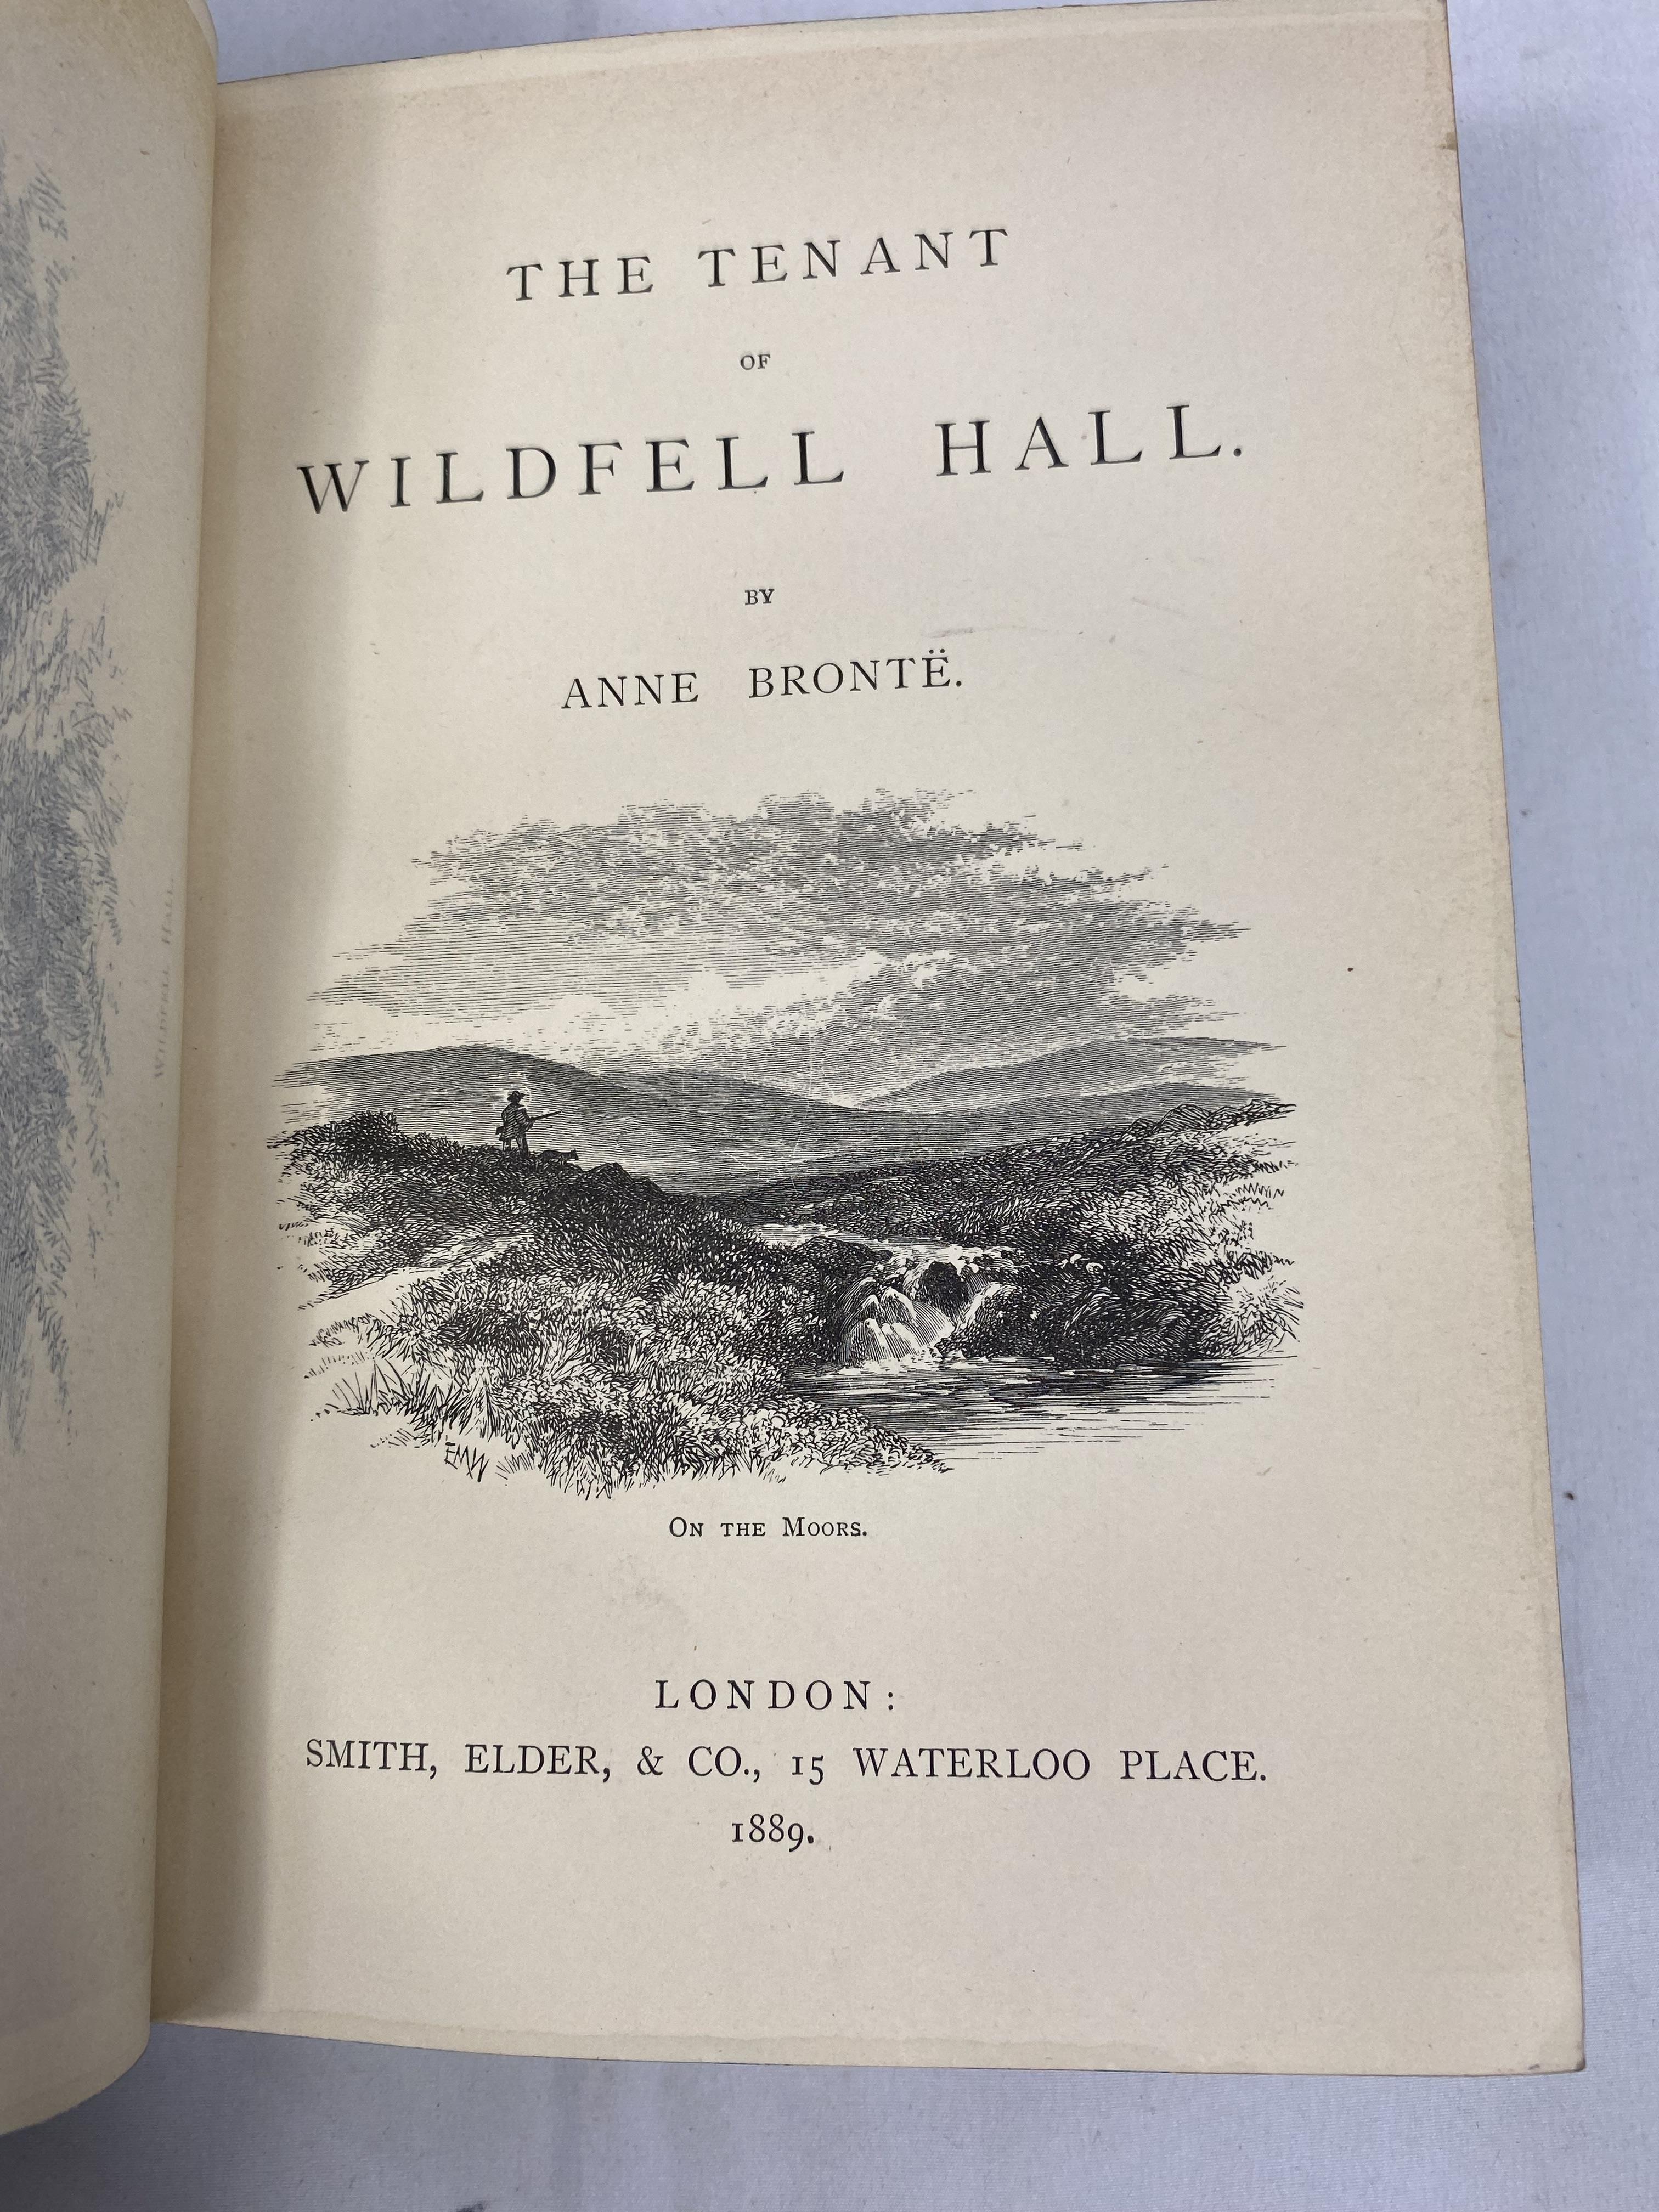 The Life and Works of Charlotte Bronte published and illustrated in seven half bound volumes - Image 6 of 9